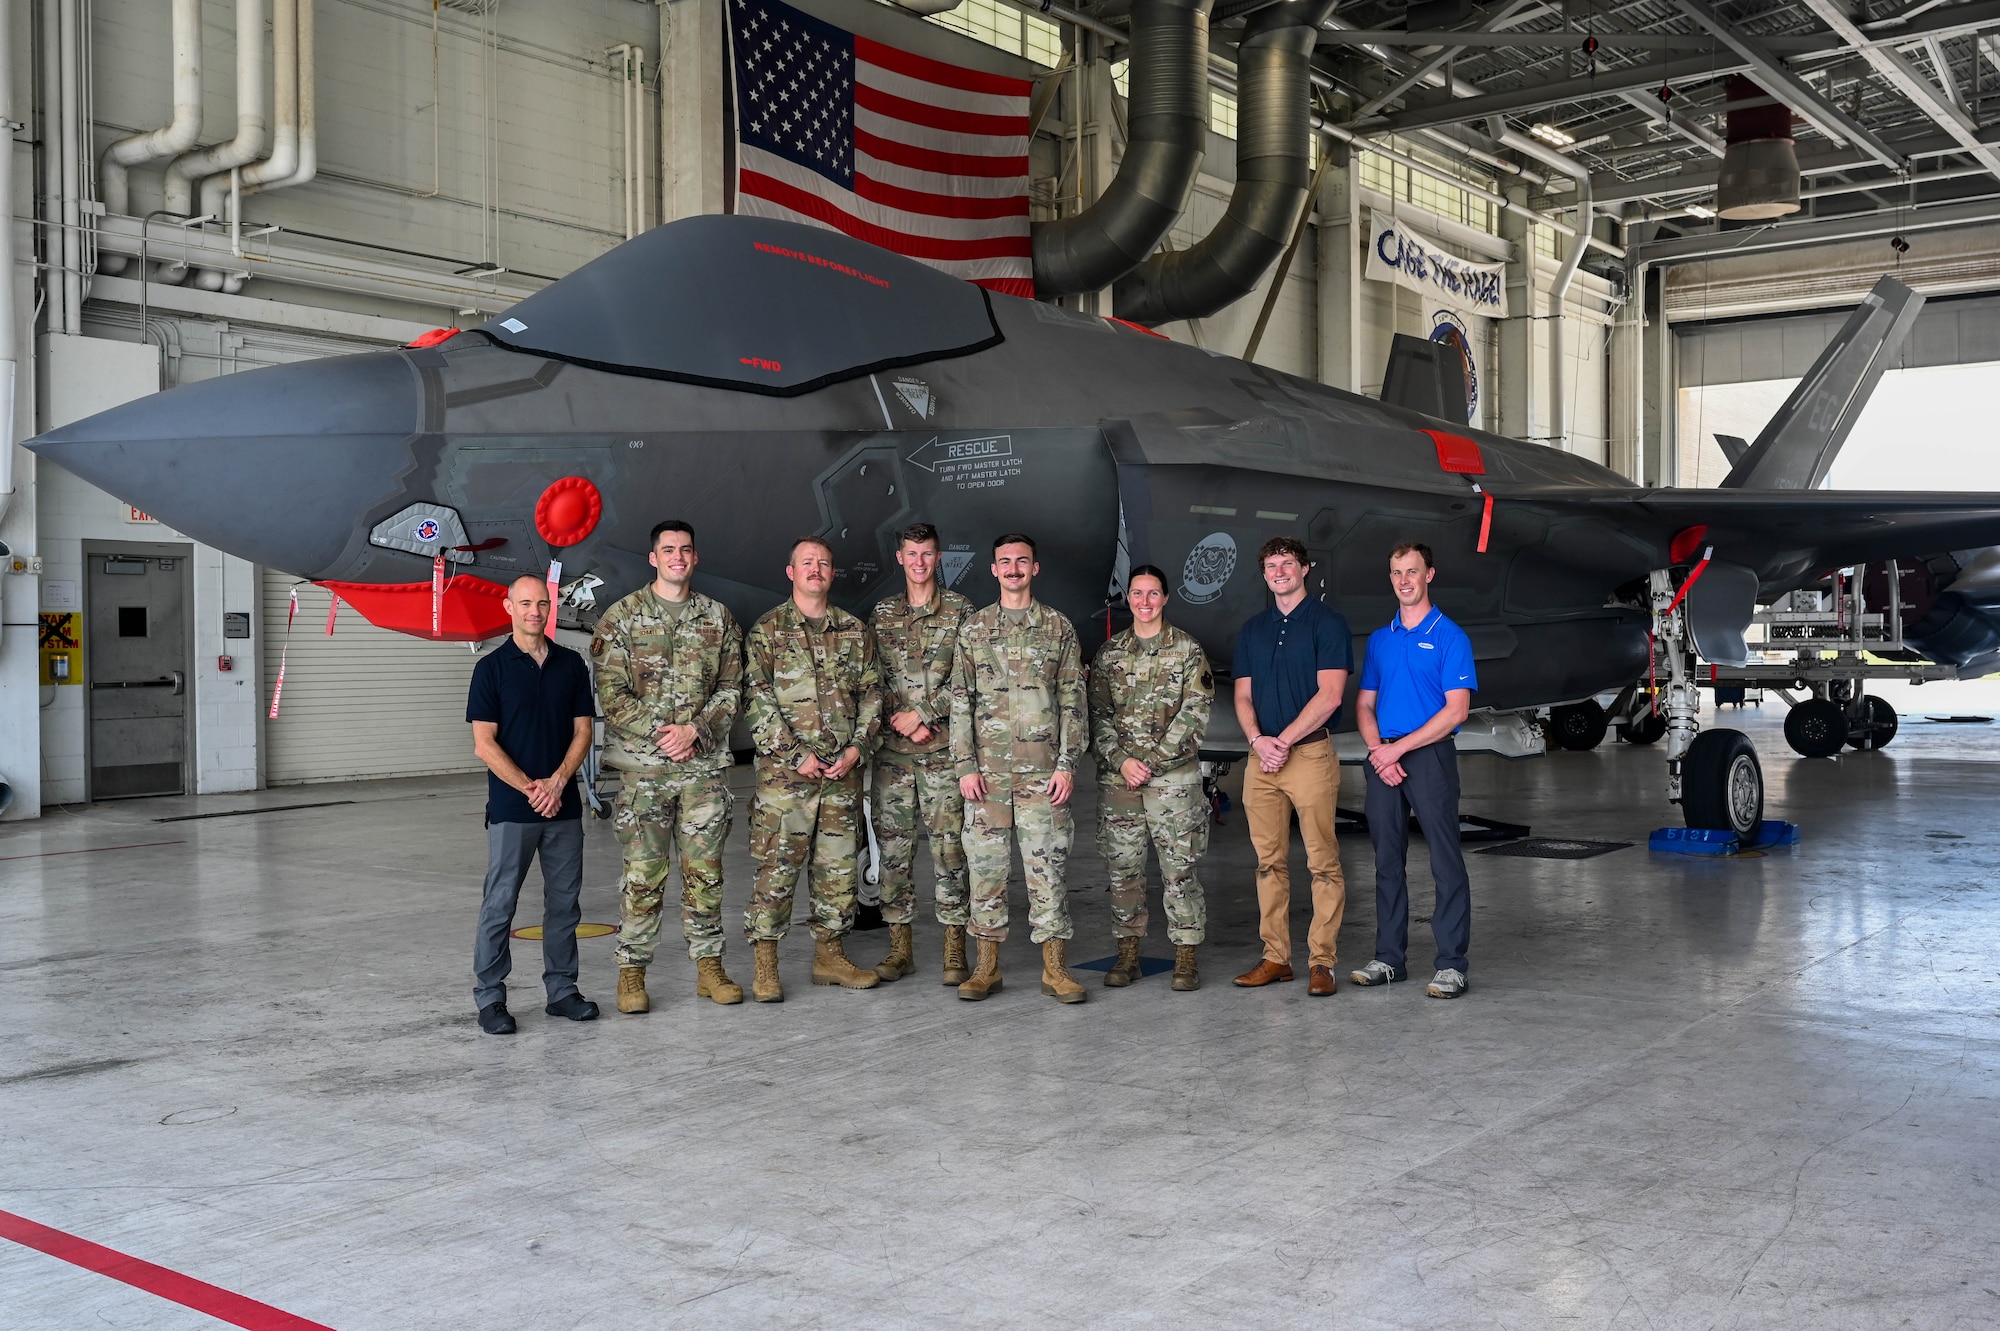 U.S. Air Force Tech. Sgt. Andrew McCamish, a 58th Aircraft Maintenance Unit aircraft section chief, and U.S. Air Force Staff Sgt. Tyler Schmitt, a 33rd Maintenance Group quality assurance inspector, developed reusable wash covers and a new canopy cover for the F-35A Lightning II at Eglin Air Force Base, Florida.